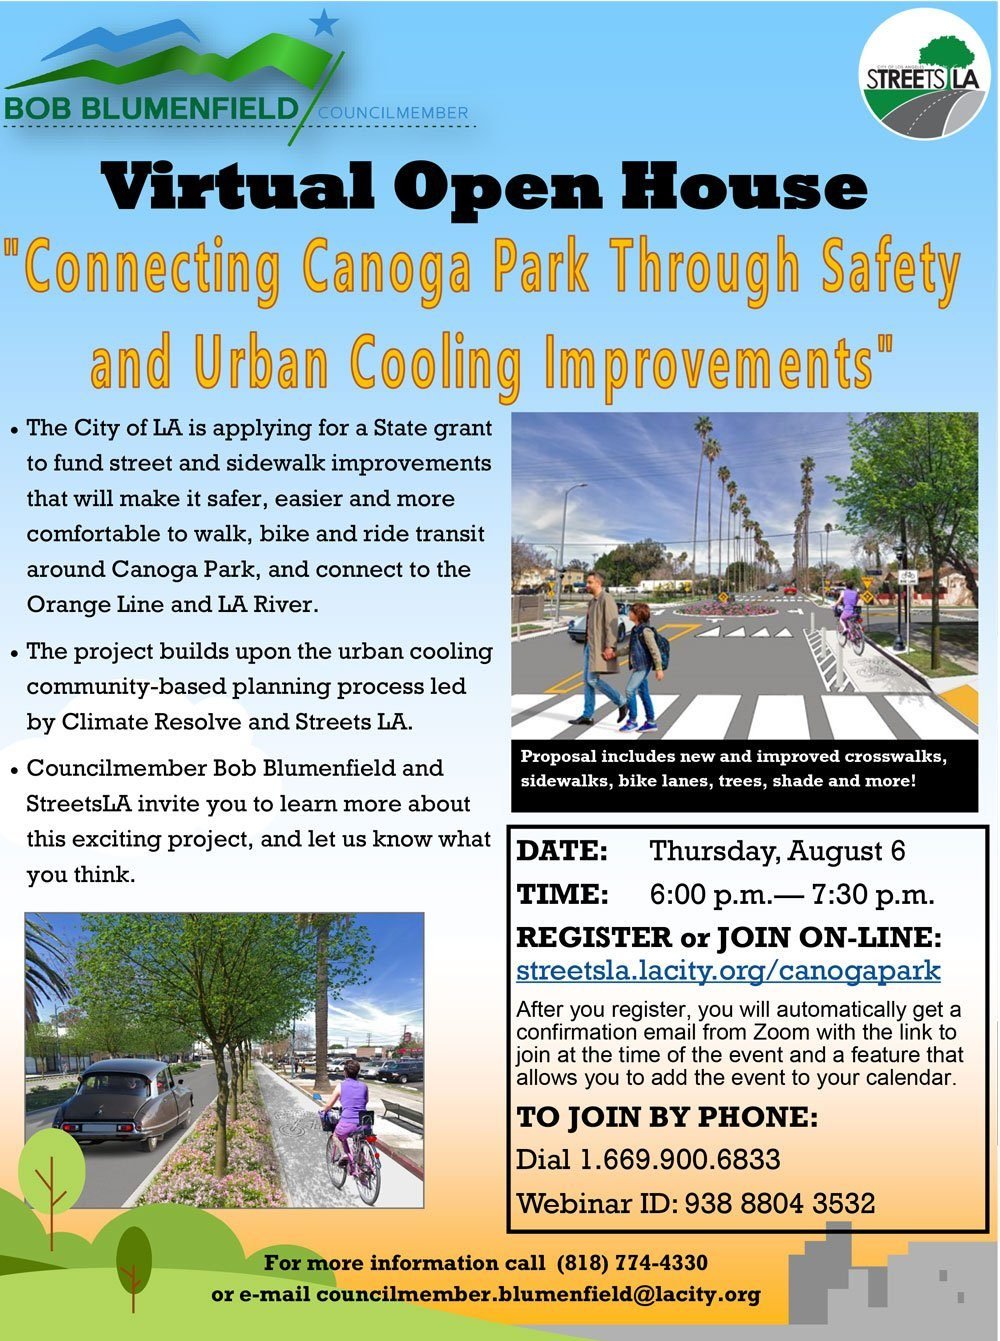 Virtual Open House – Thursday, August 6 – “Connecting Canoga Park Through Safety and Urban Cooling Improvements”